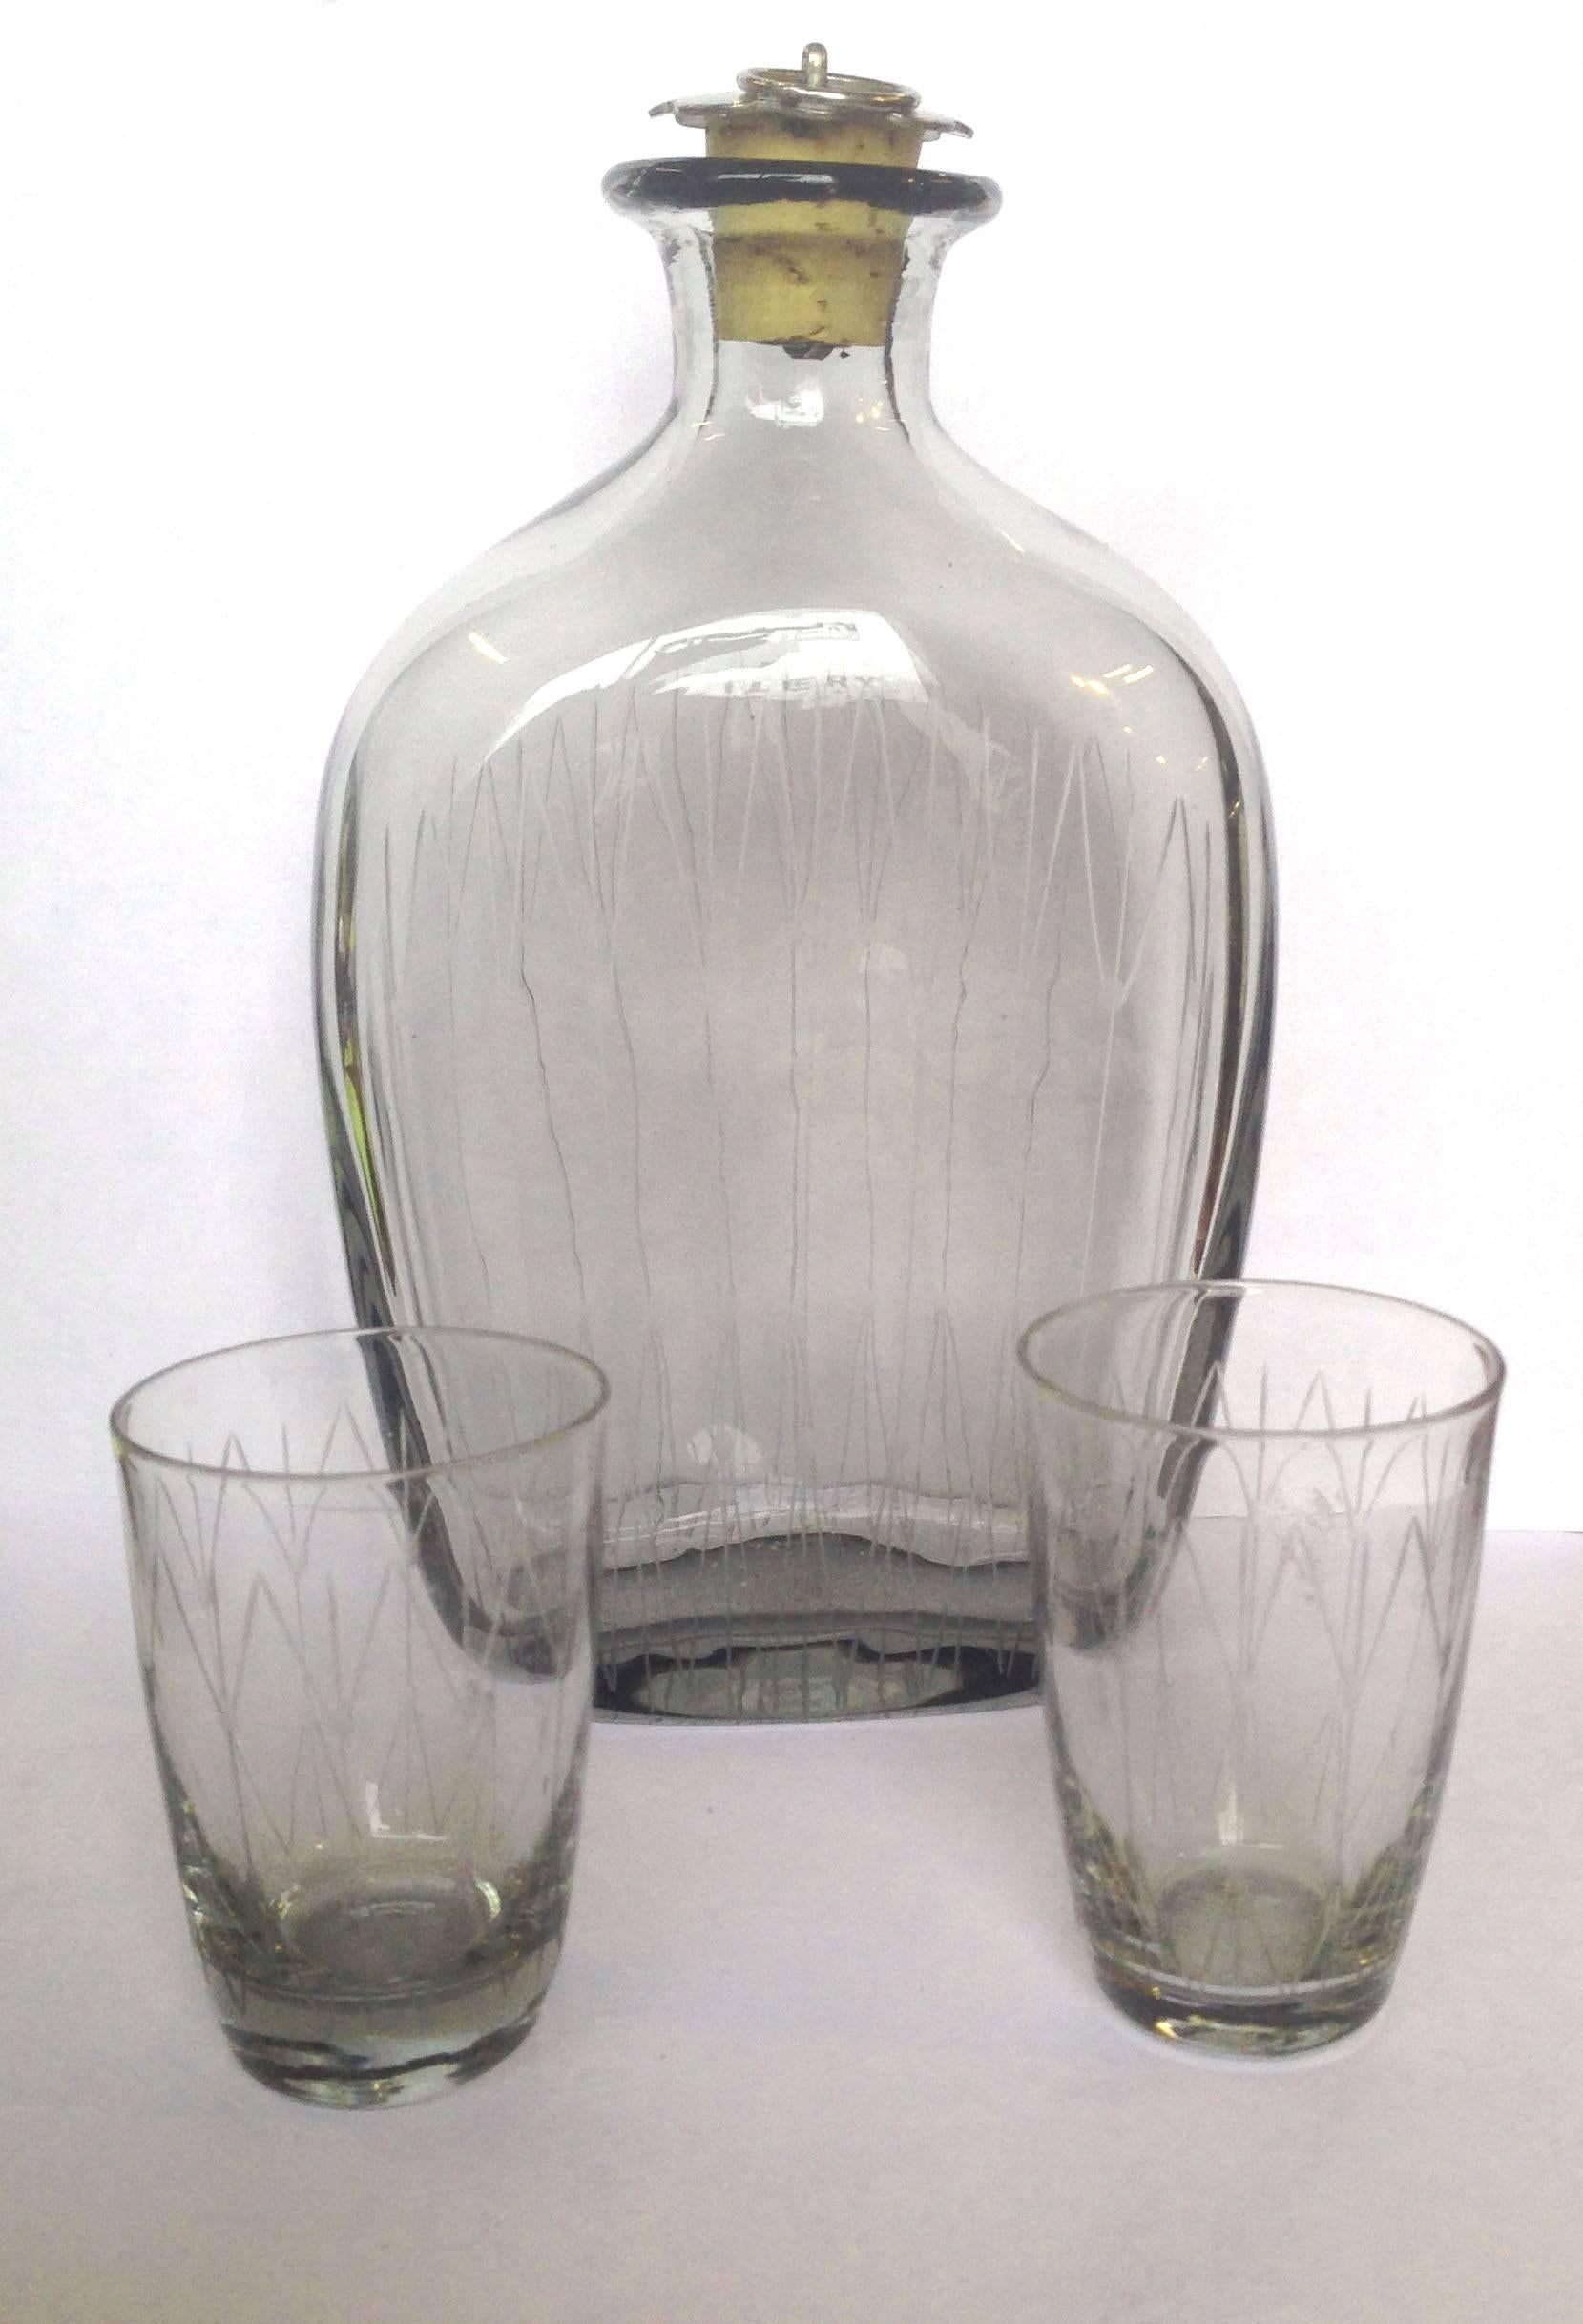 Scandinavian Mid Century Modern Minimalist Schnapps Decanter and Glasses Set 

Delicate and modern vintage etched crystal decanter and two glasses, made in Denmark by Holmegaard Glass Company, circa 1960. The sleek and minimalist design is combined